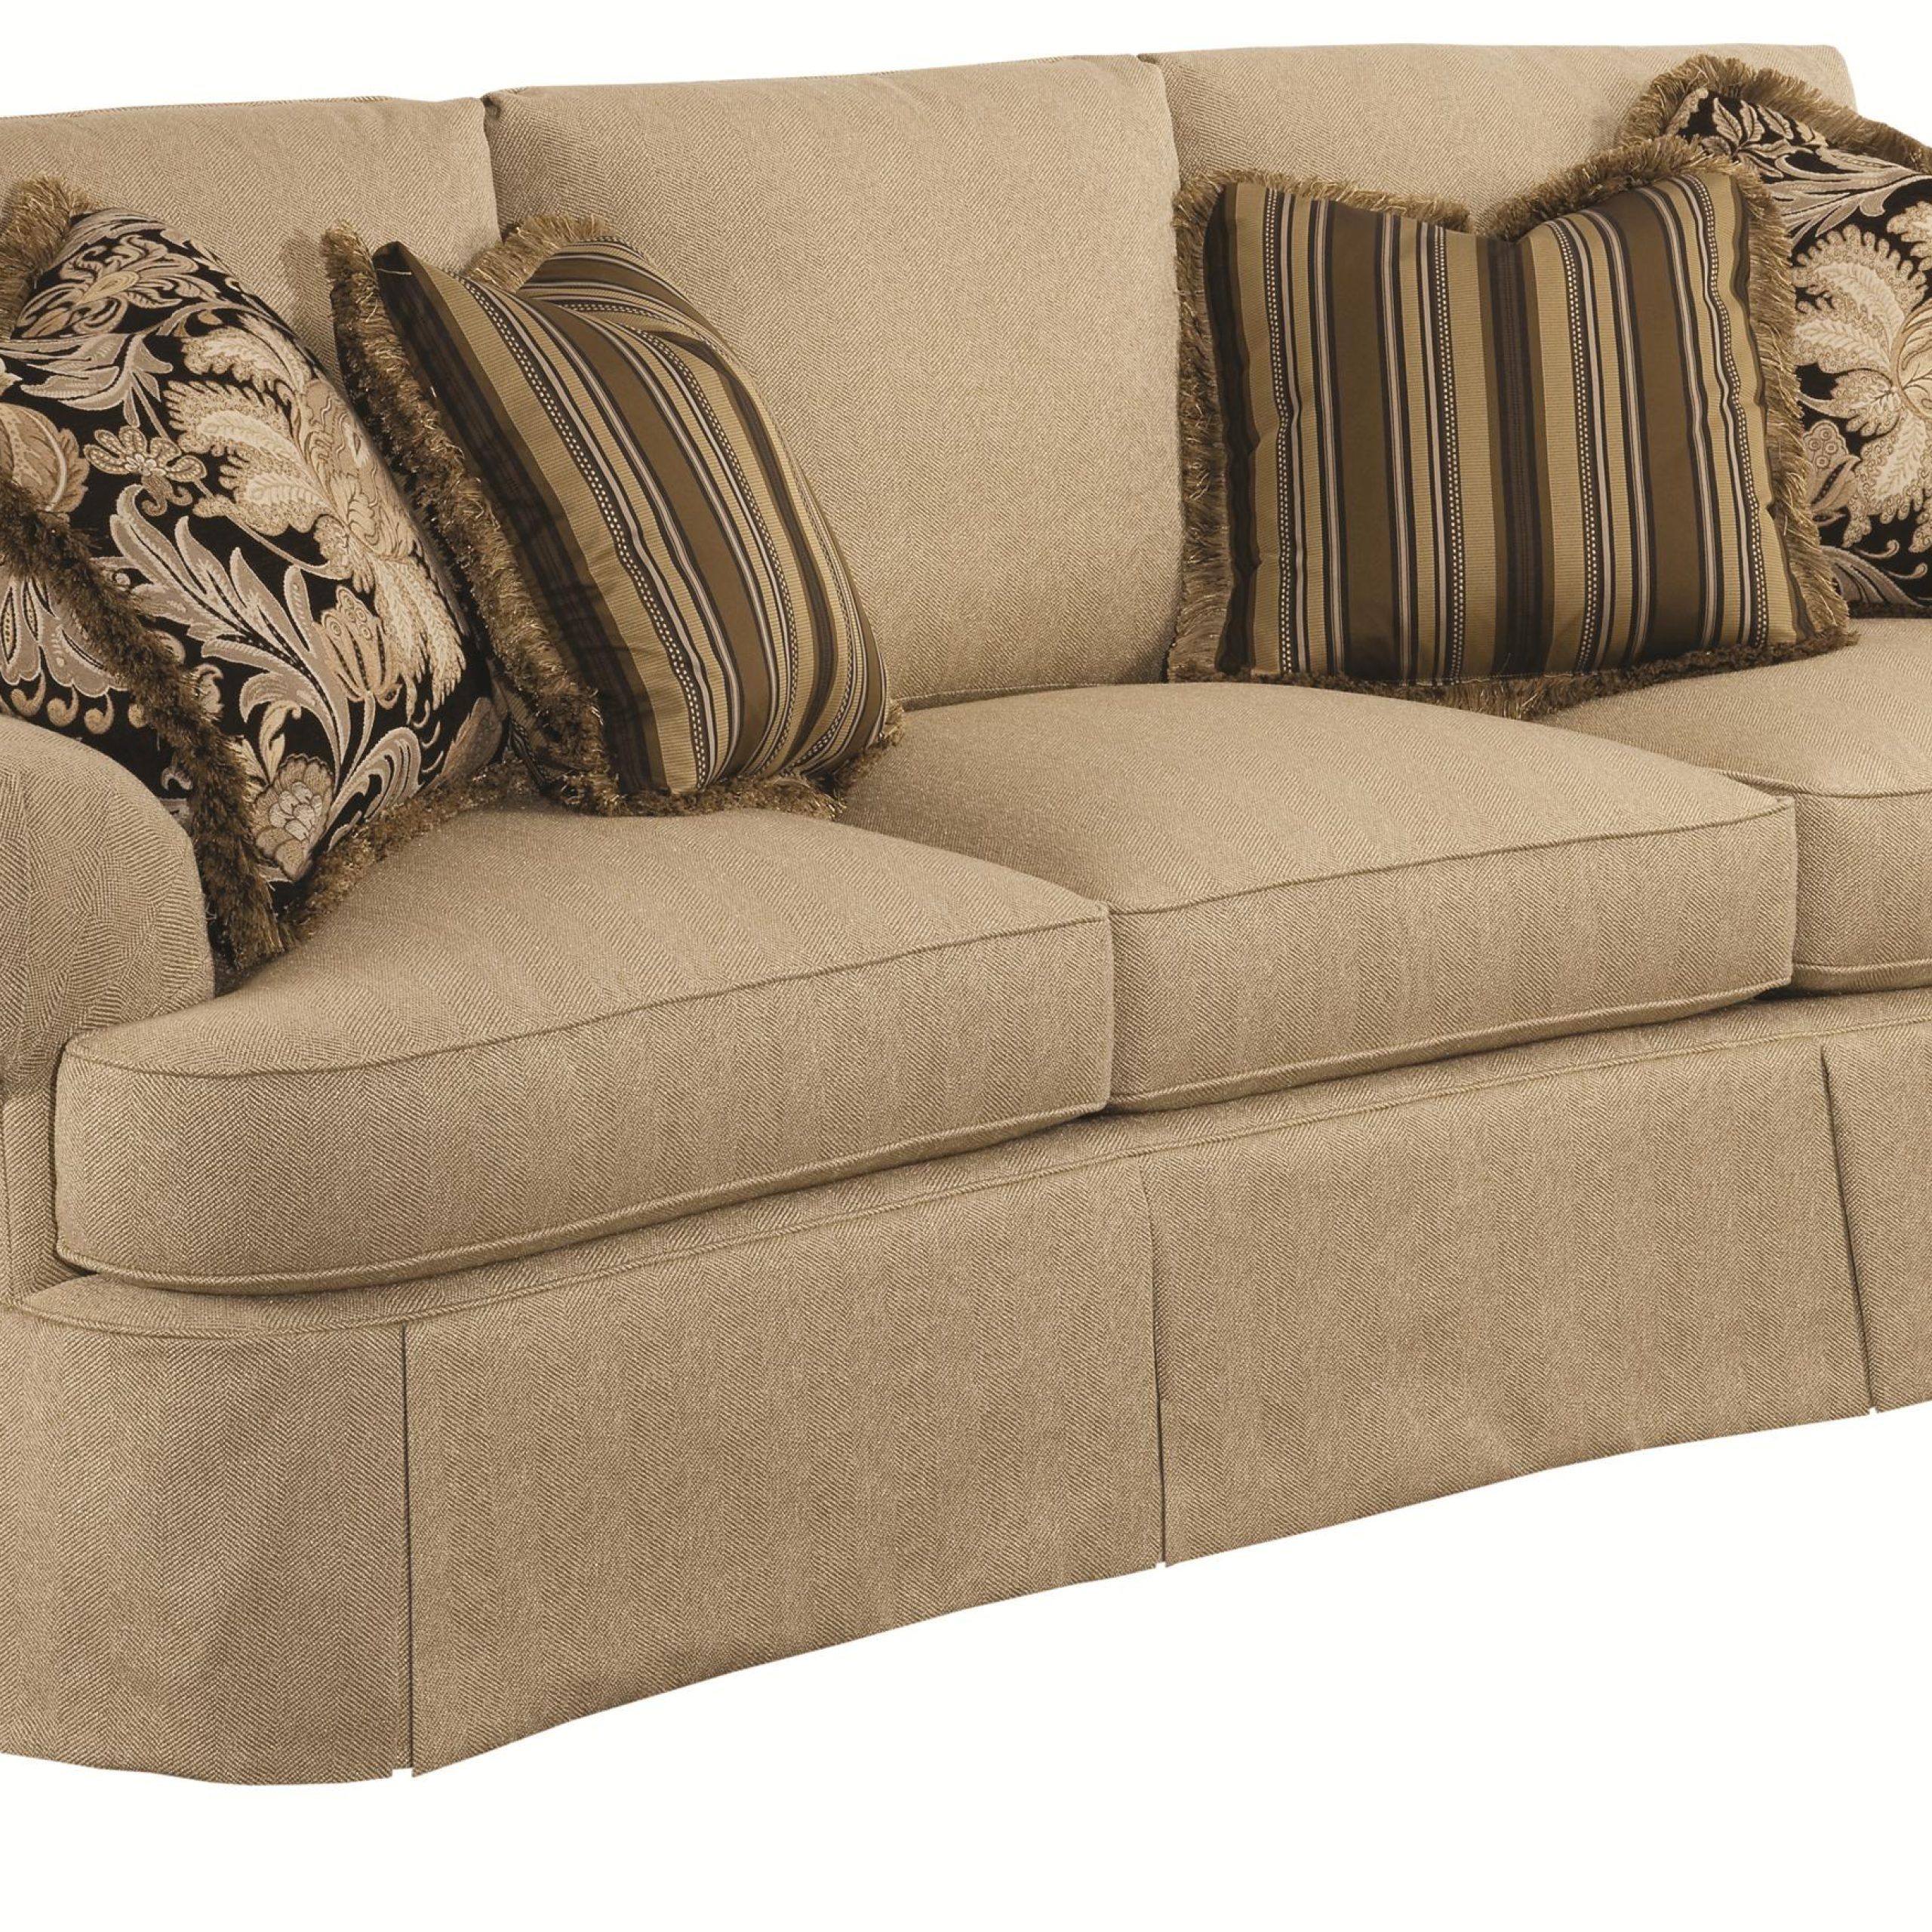 Kincaid Furniture Danbury Traditional Conversation Sofa With Waterfall For Traditional Black Fabric Sofas (View 19 of 21)